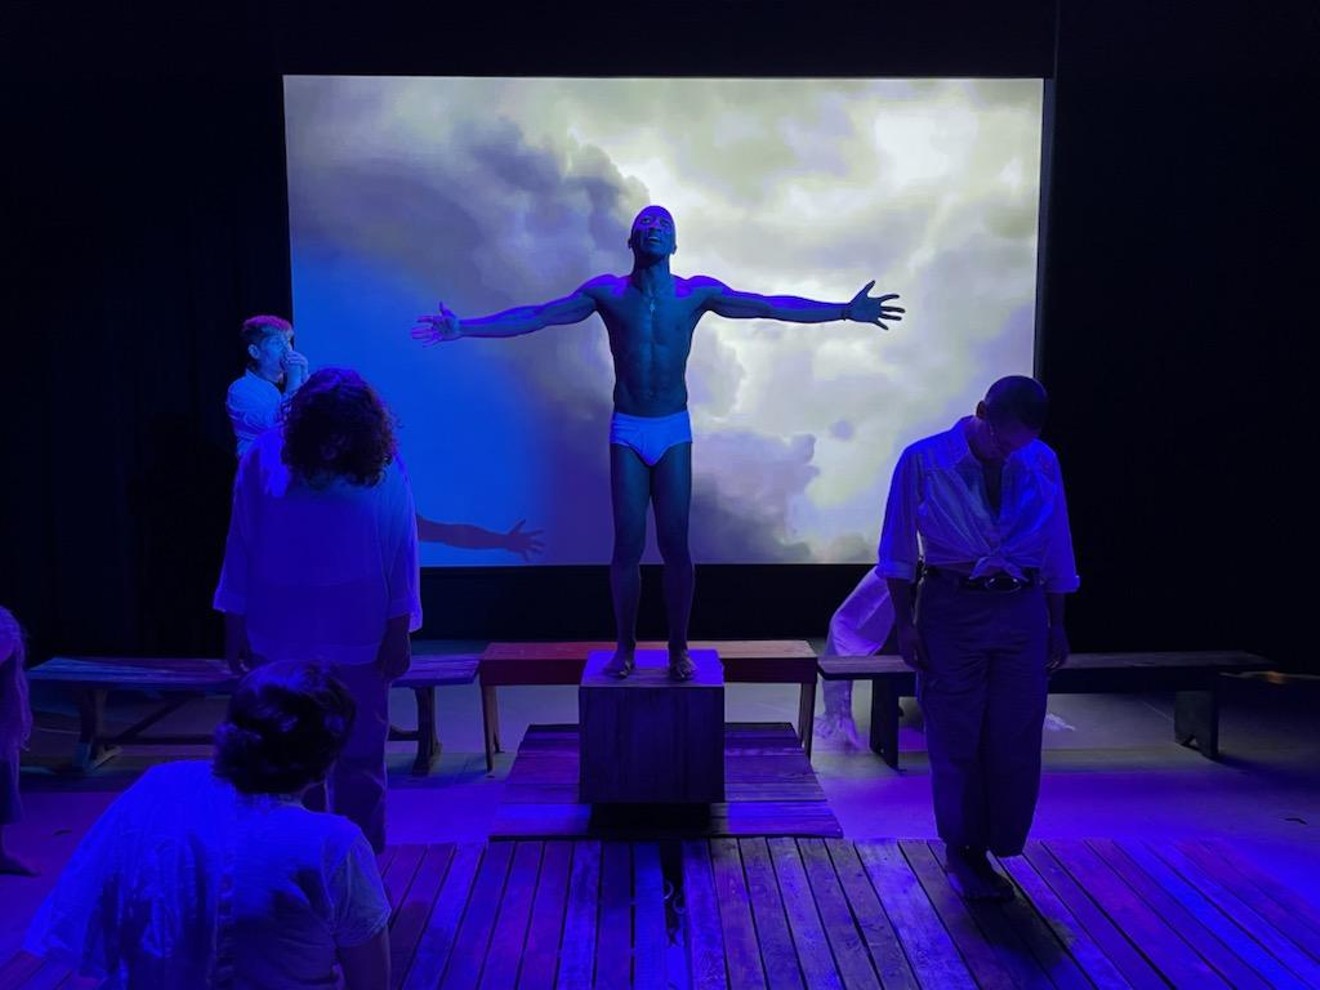 Joshua (Johnathan Underwood) prepares to be crucified while Judas (Emma Maxfield) chokes back tears on stage left, with members of the ensemble between them.